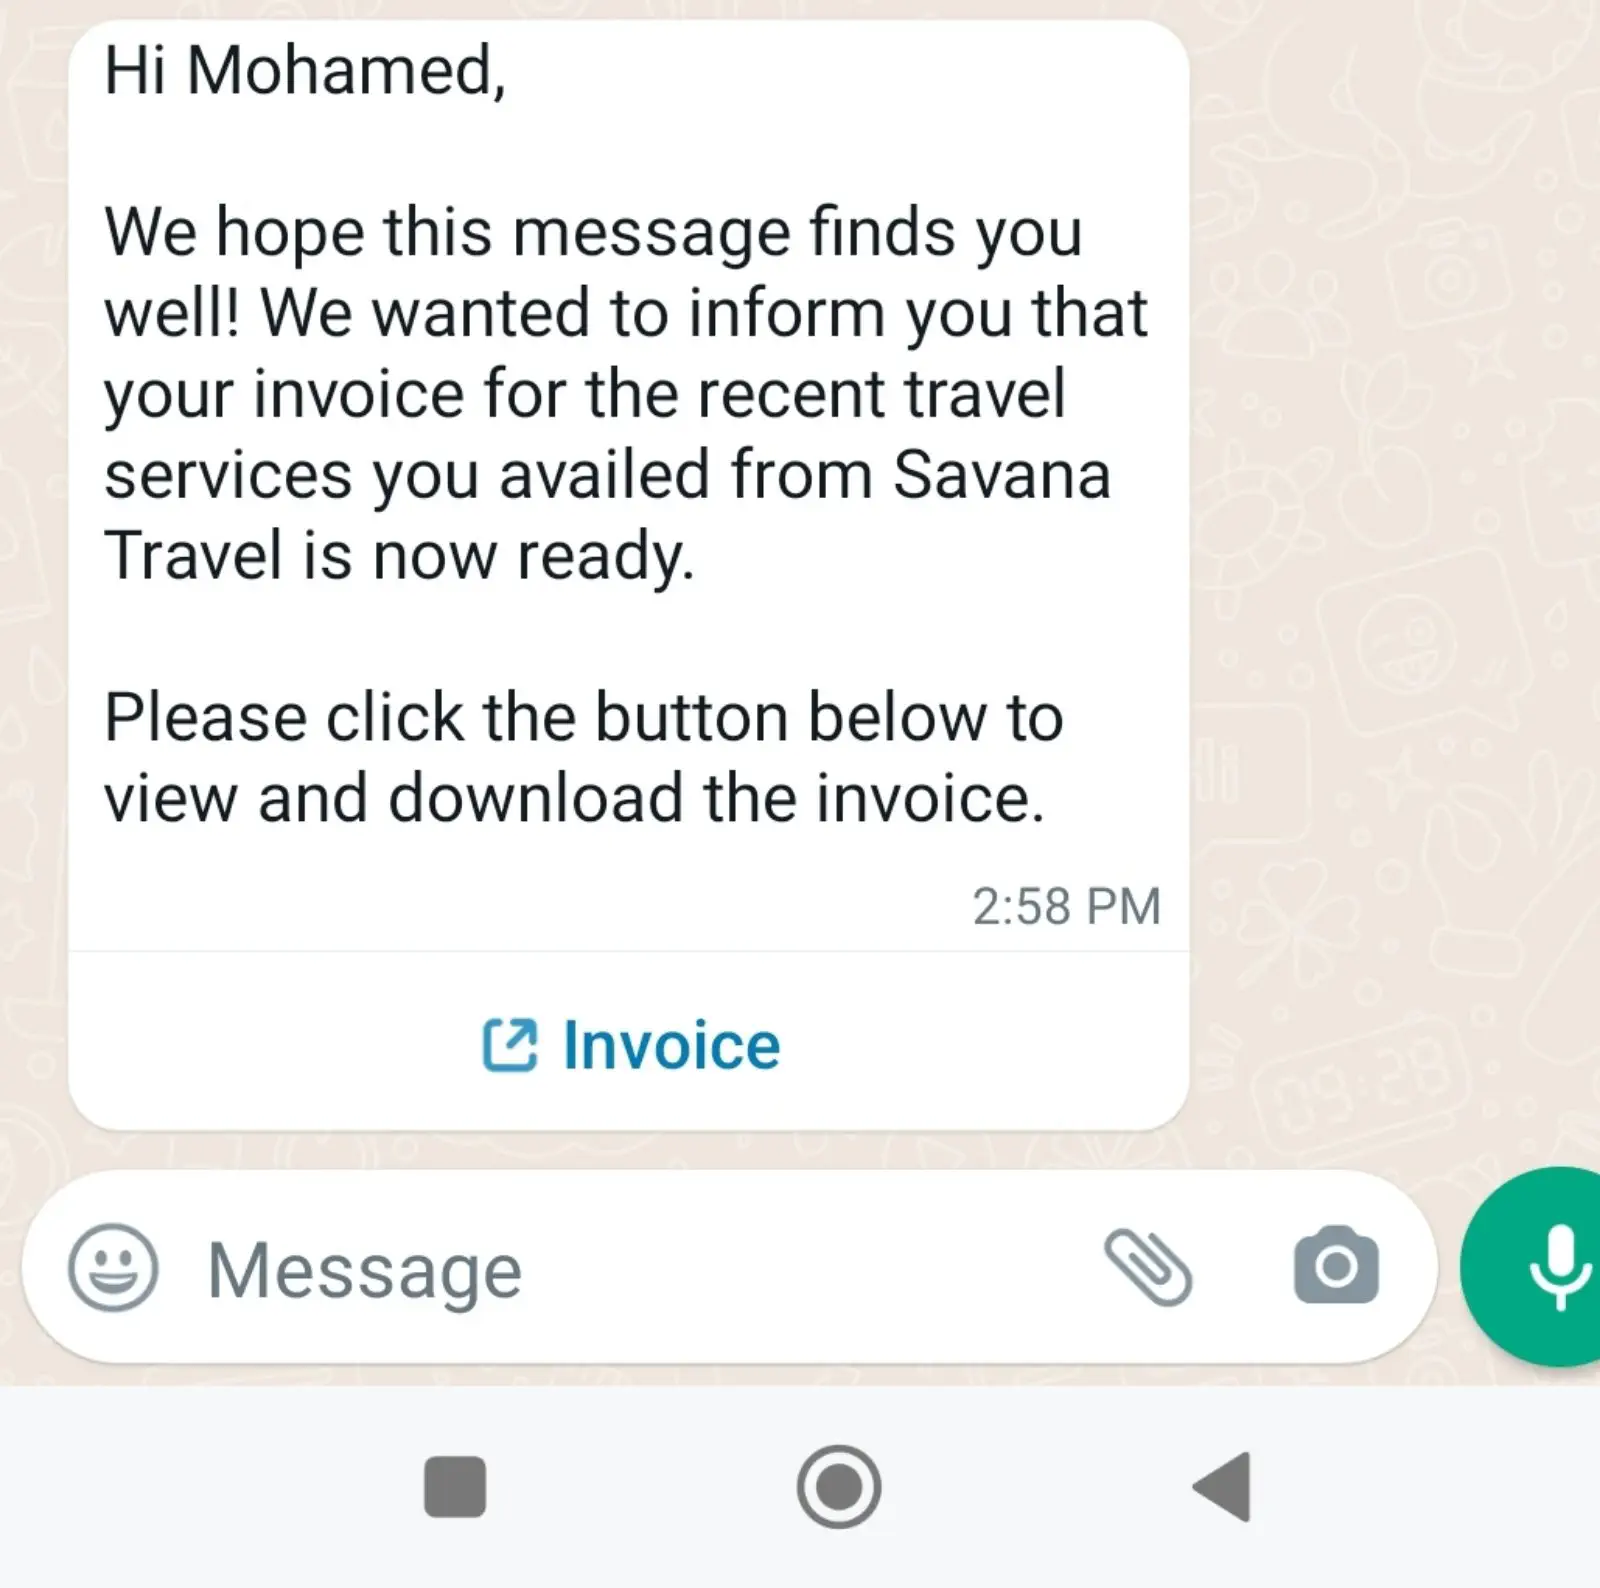 A WhatsApp message with a link for downloading an invoice